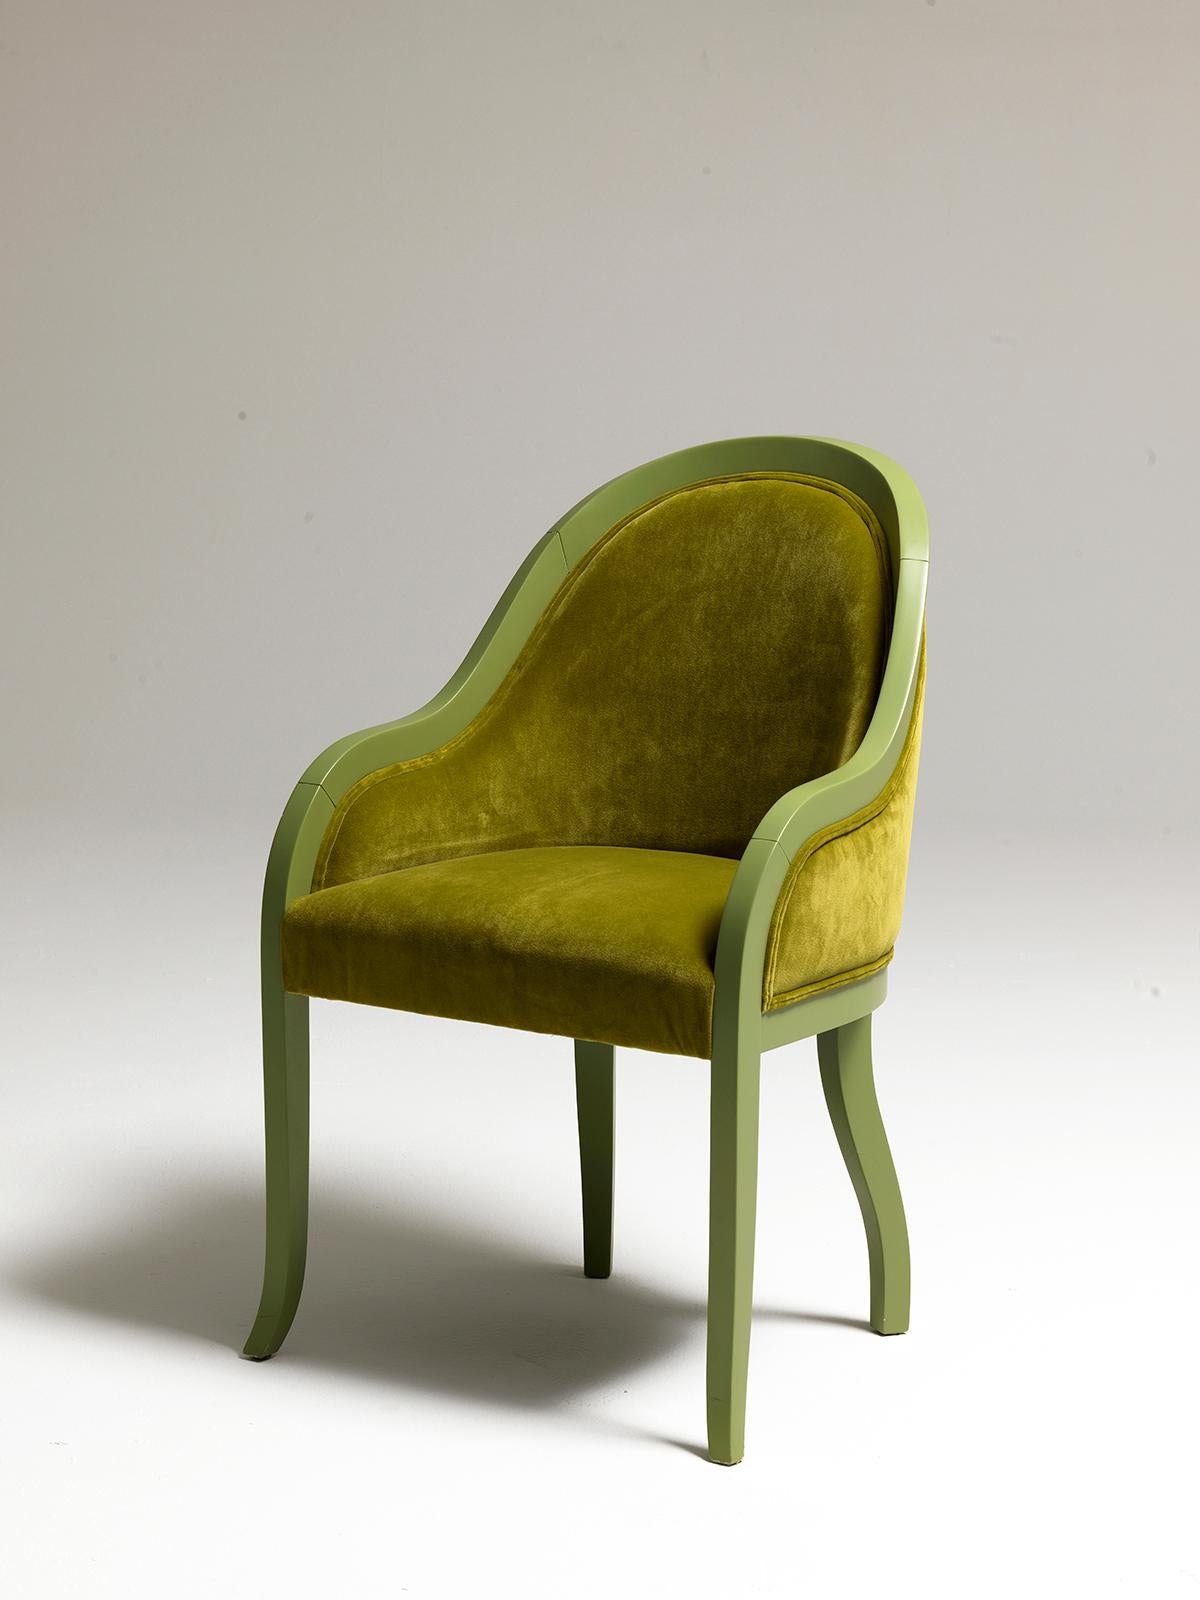 Italian Petunia Armchair in Green Lacquered Wood and Velvet Upholstery by Aldo Cibic